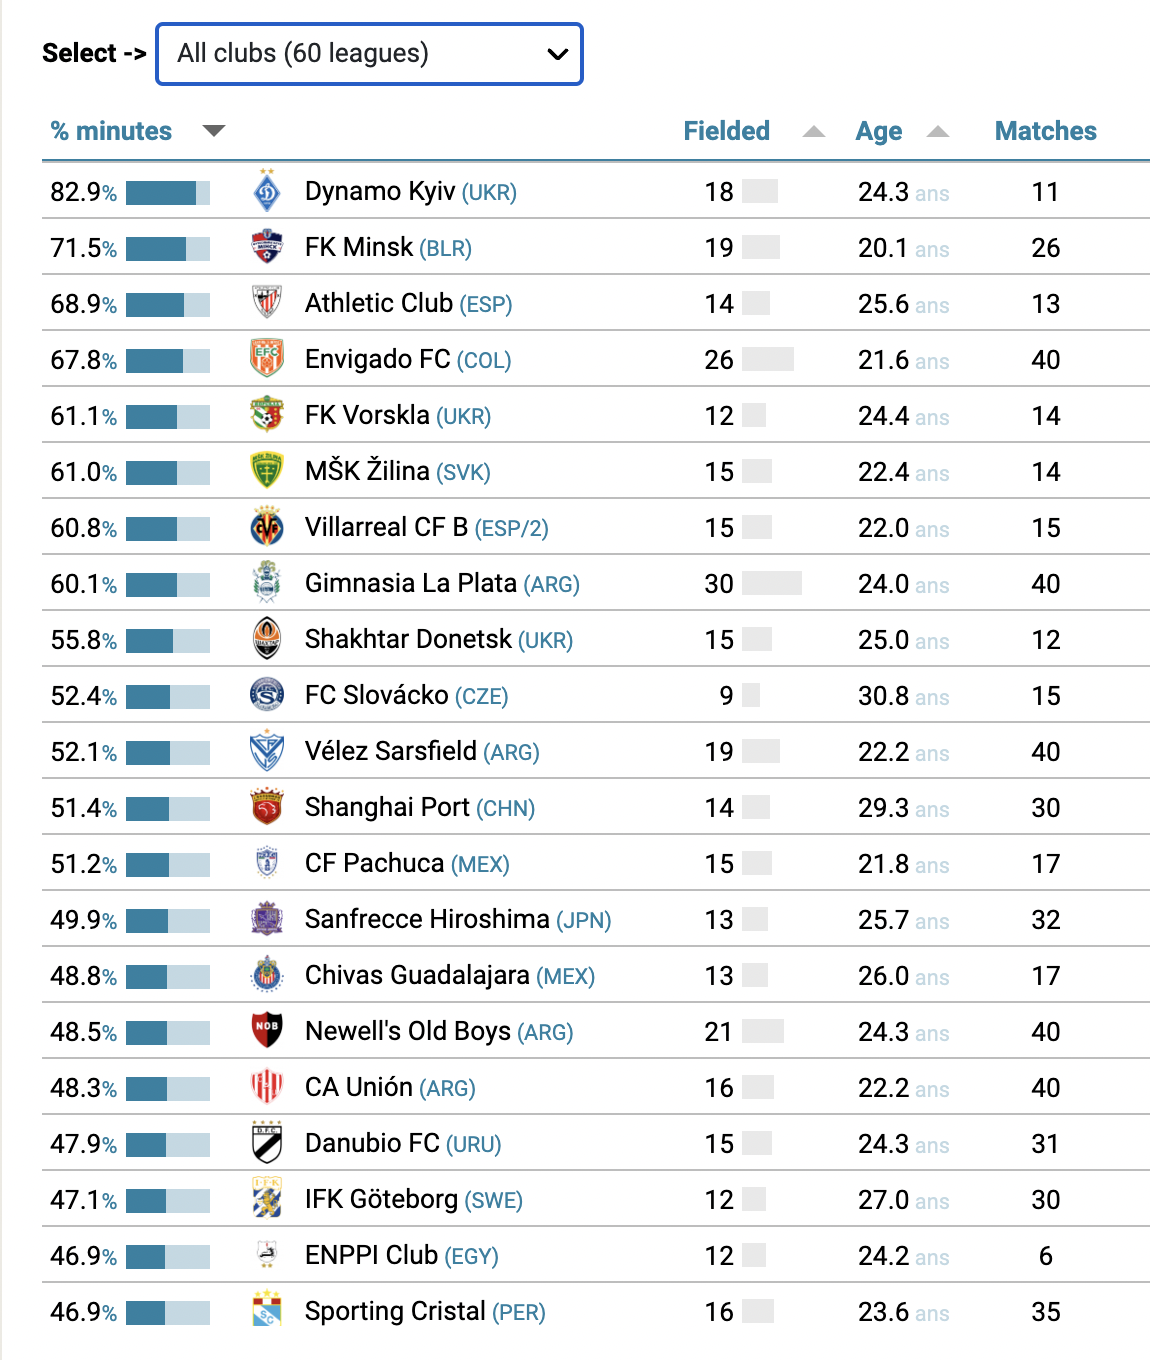 Teams in 60 leagues around the world ranked according to club-trained minutes